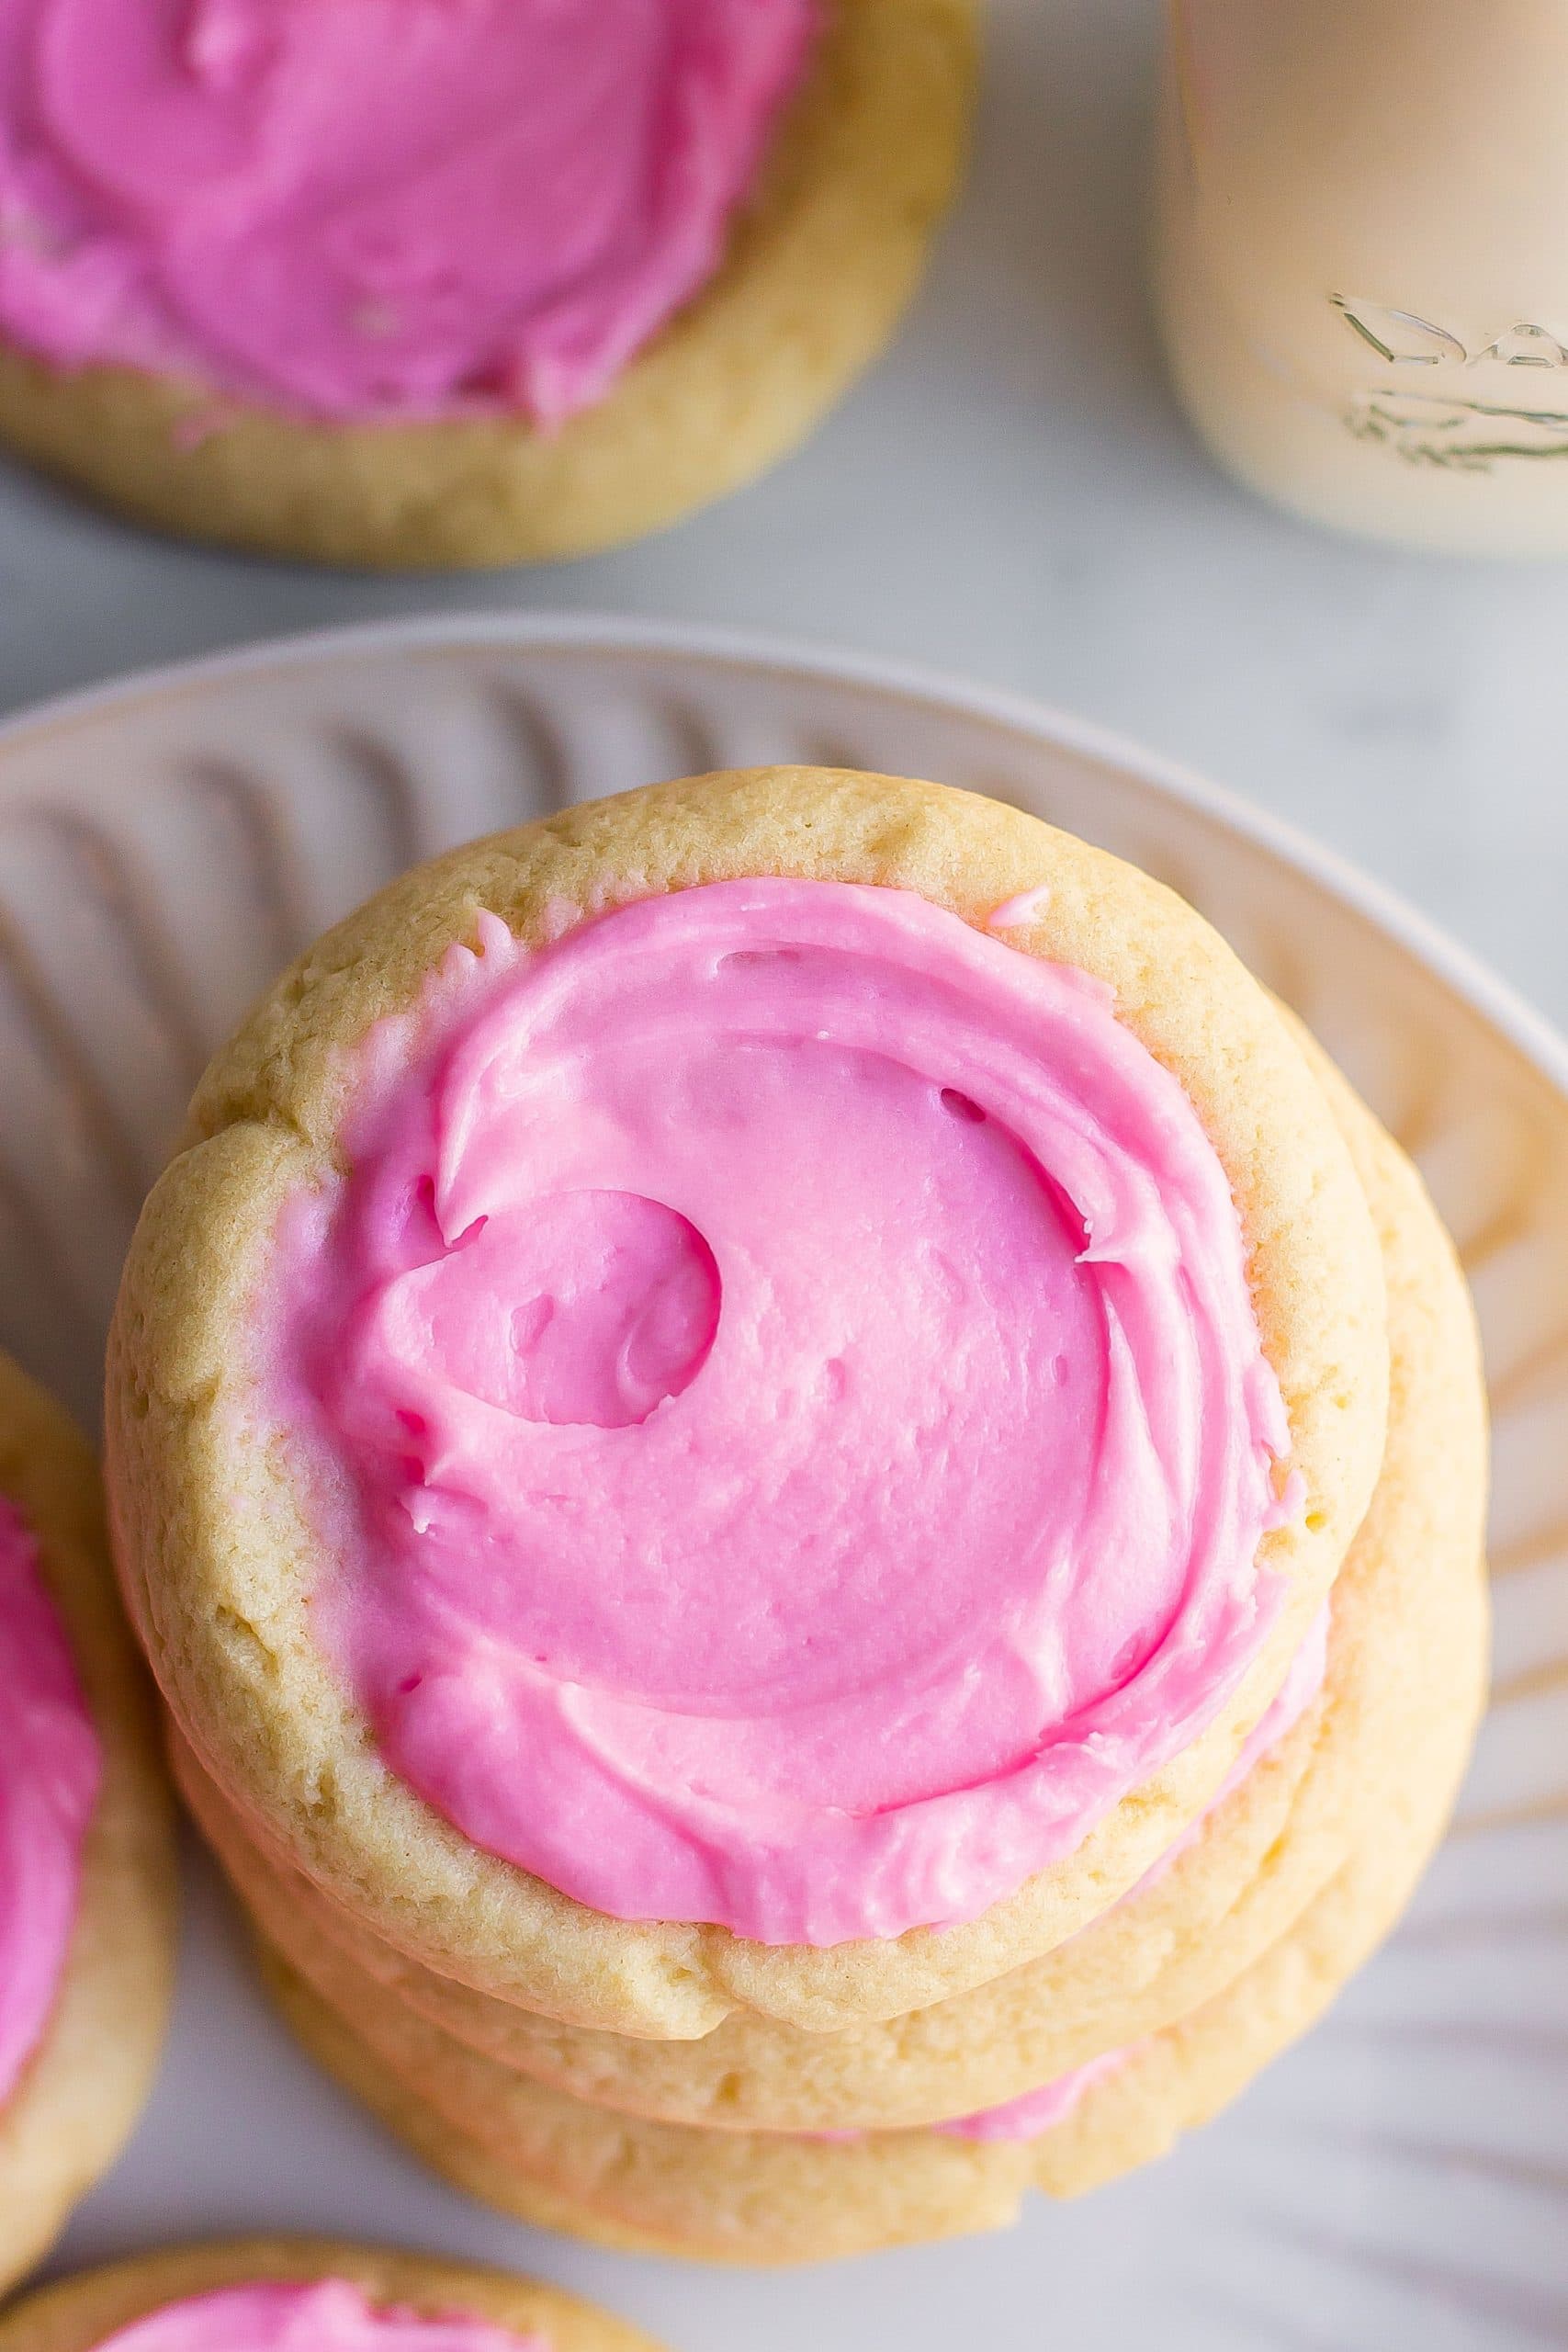 birds-eye view of sugar cookie with pink frosting